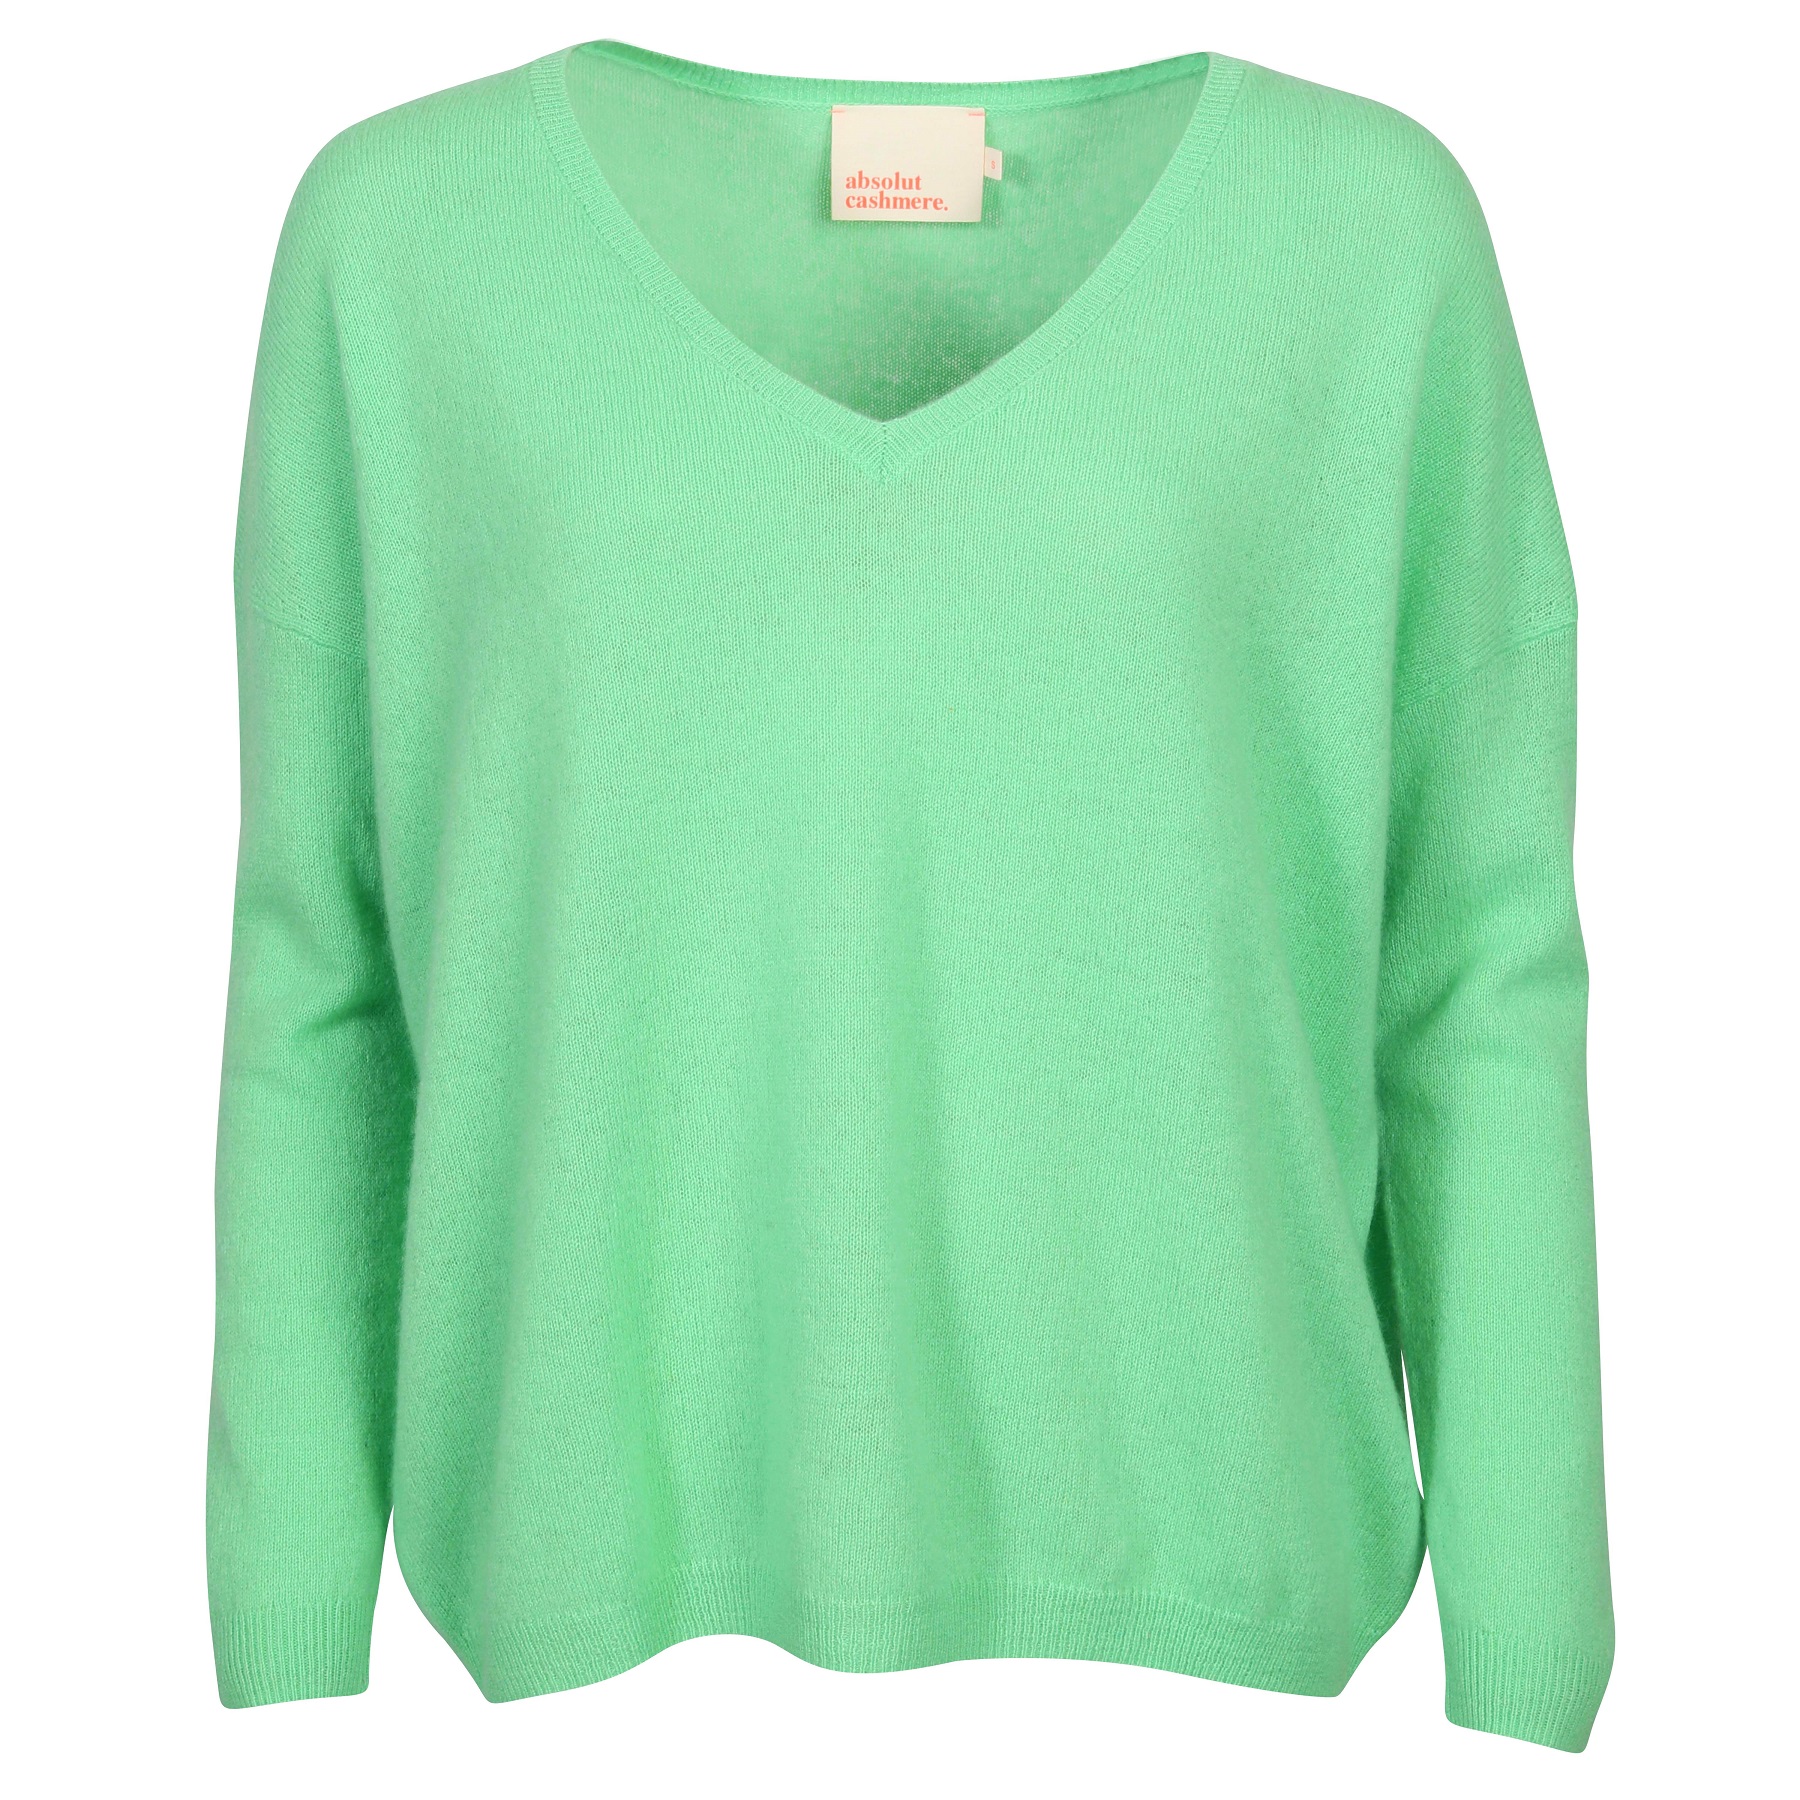 Absolut Cashmere Pullover Angele in Light Green M